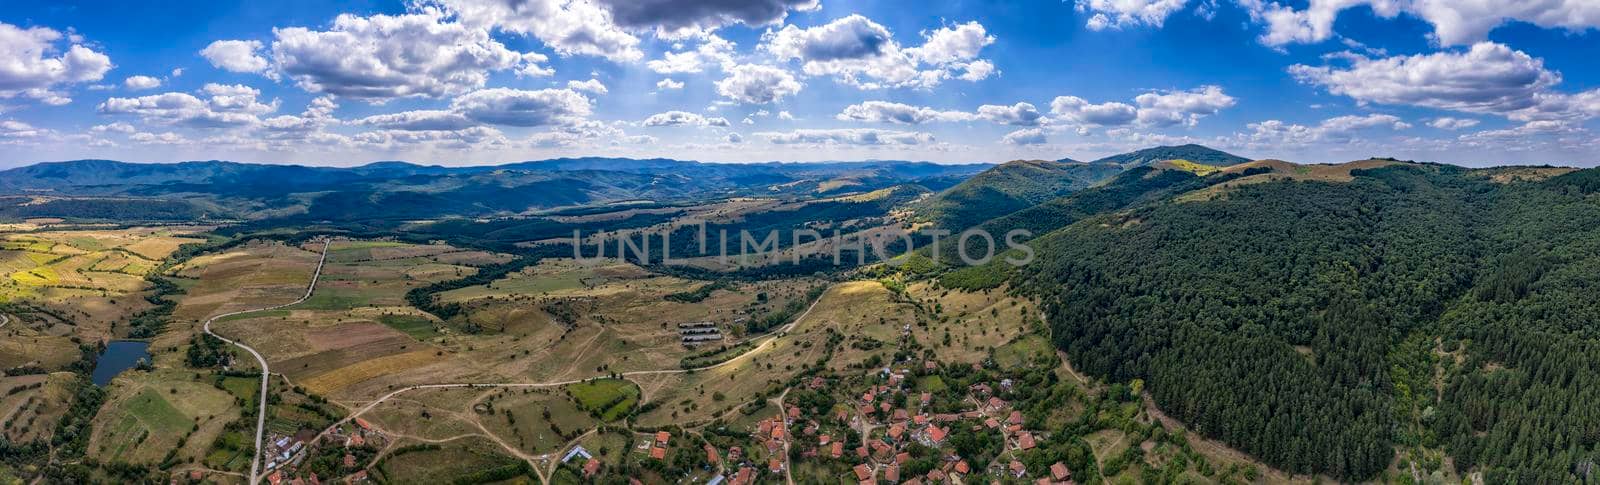 Amazing Aerial panorama from a drone of countryside fields, trees, a mountain peaks at cloudy day. Countryside. Stunning detailAmazing Aerial panorama from a drone of countryside fields, trees, a mountain peaks at cloudy day. Countryside. Stunning detail